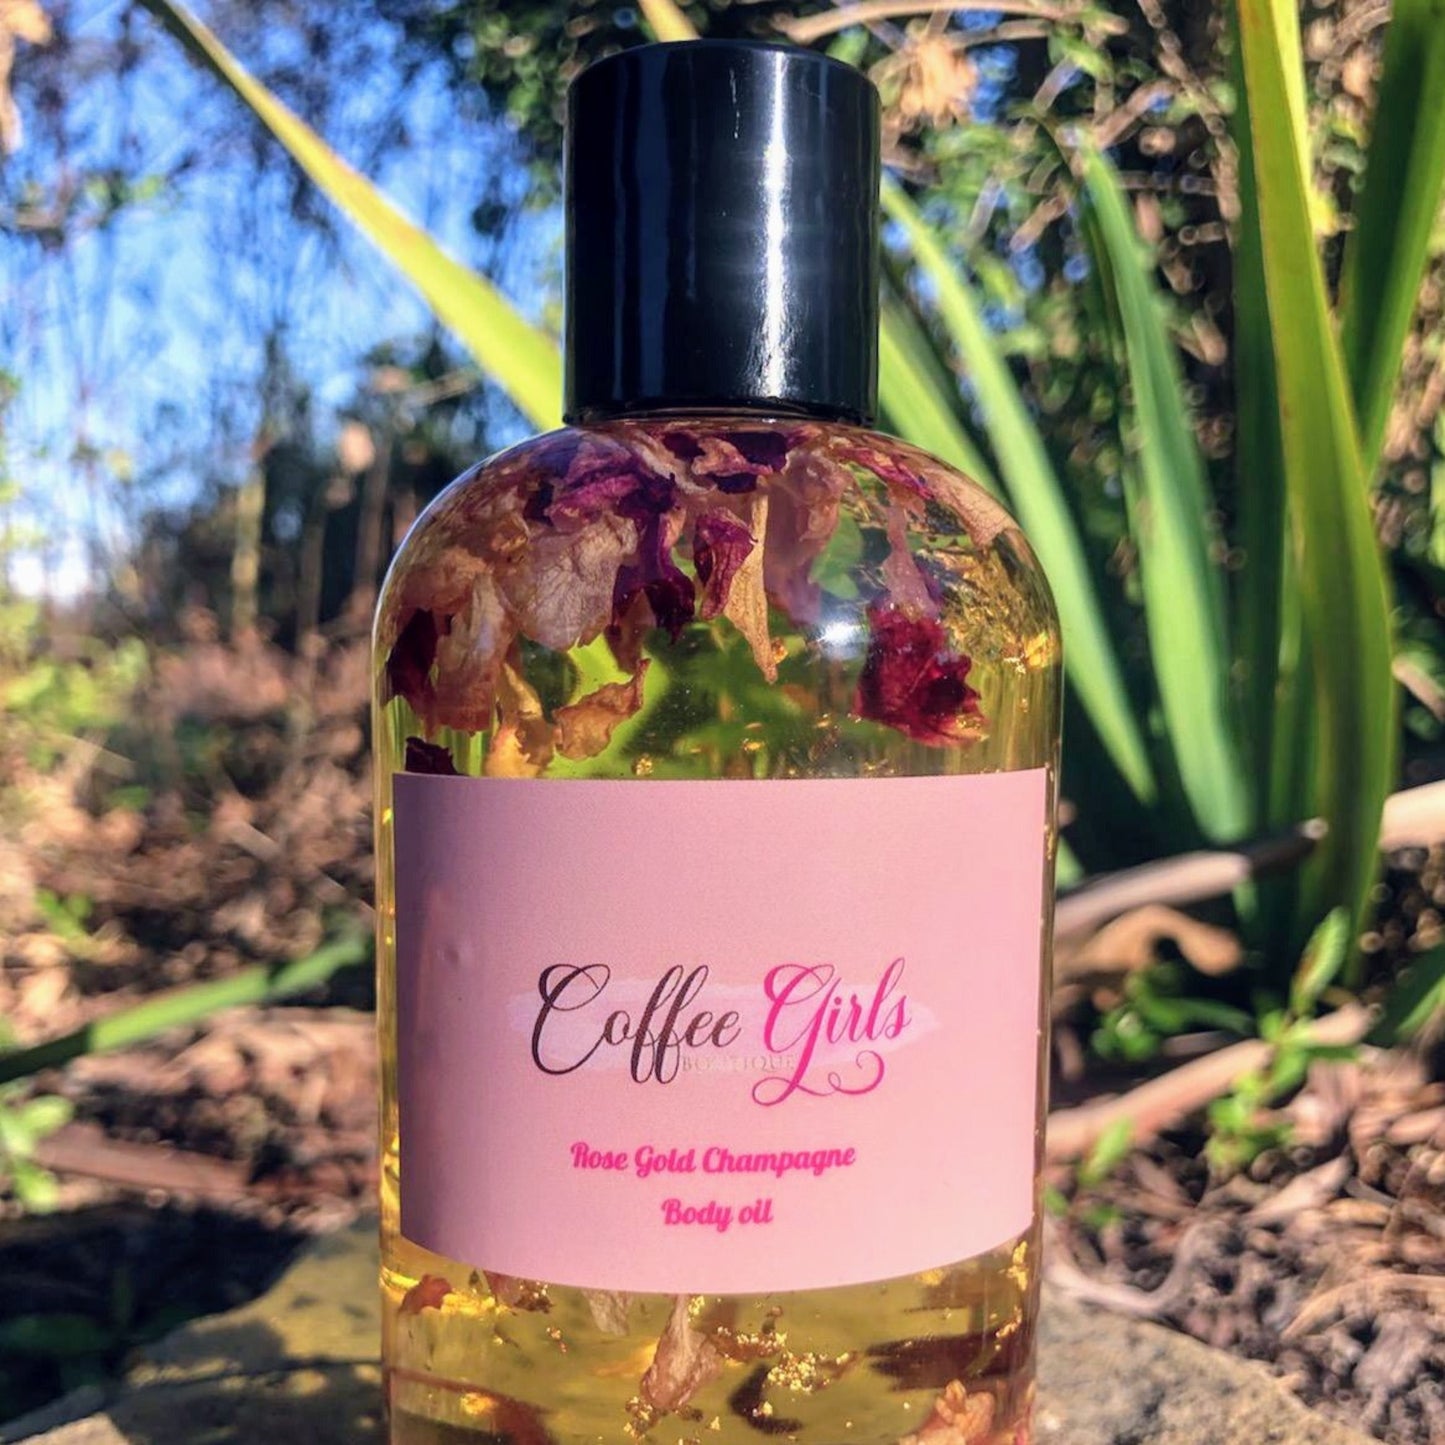 Rose Gold Champagne Body Oil